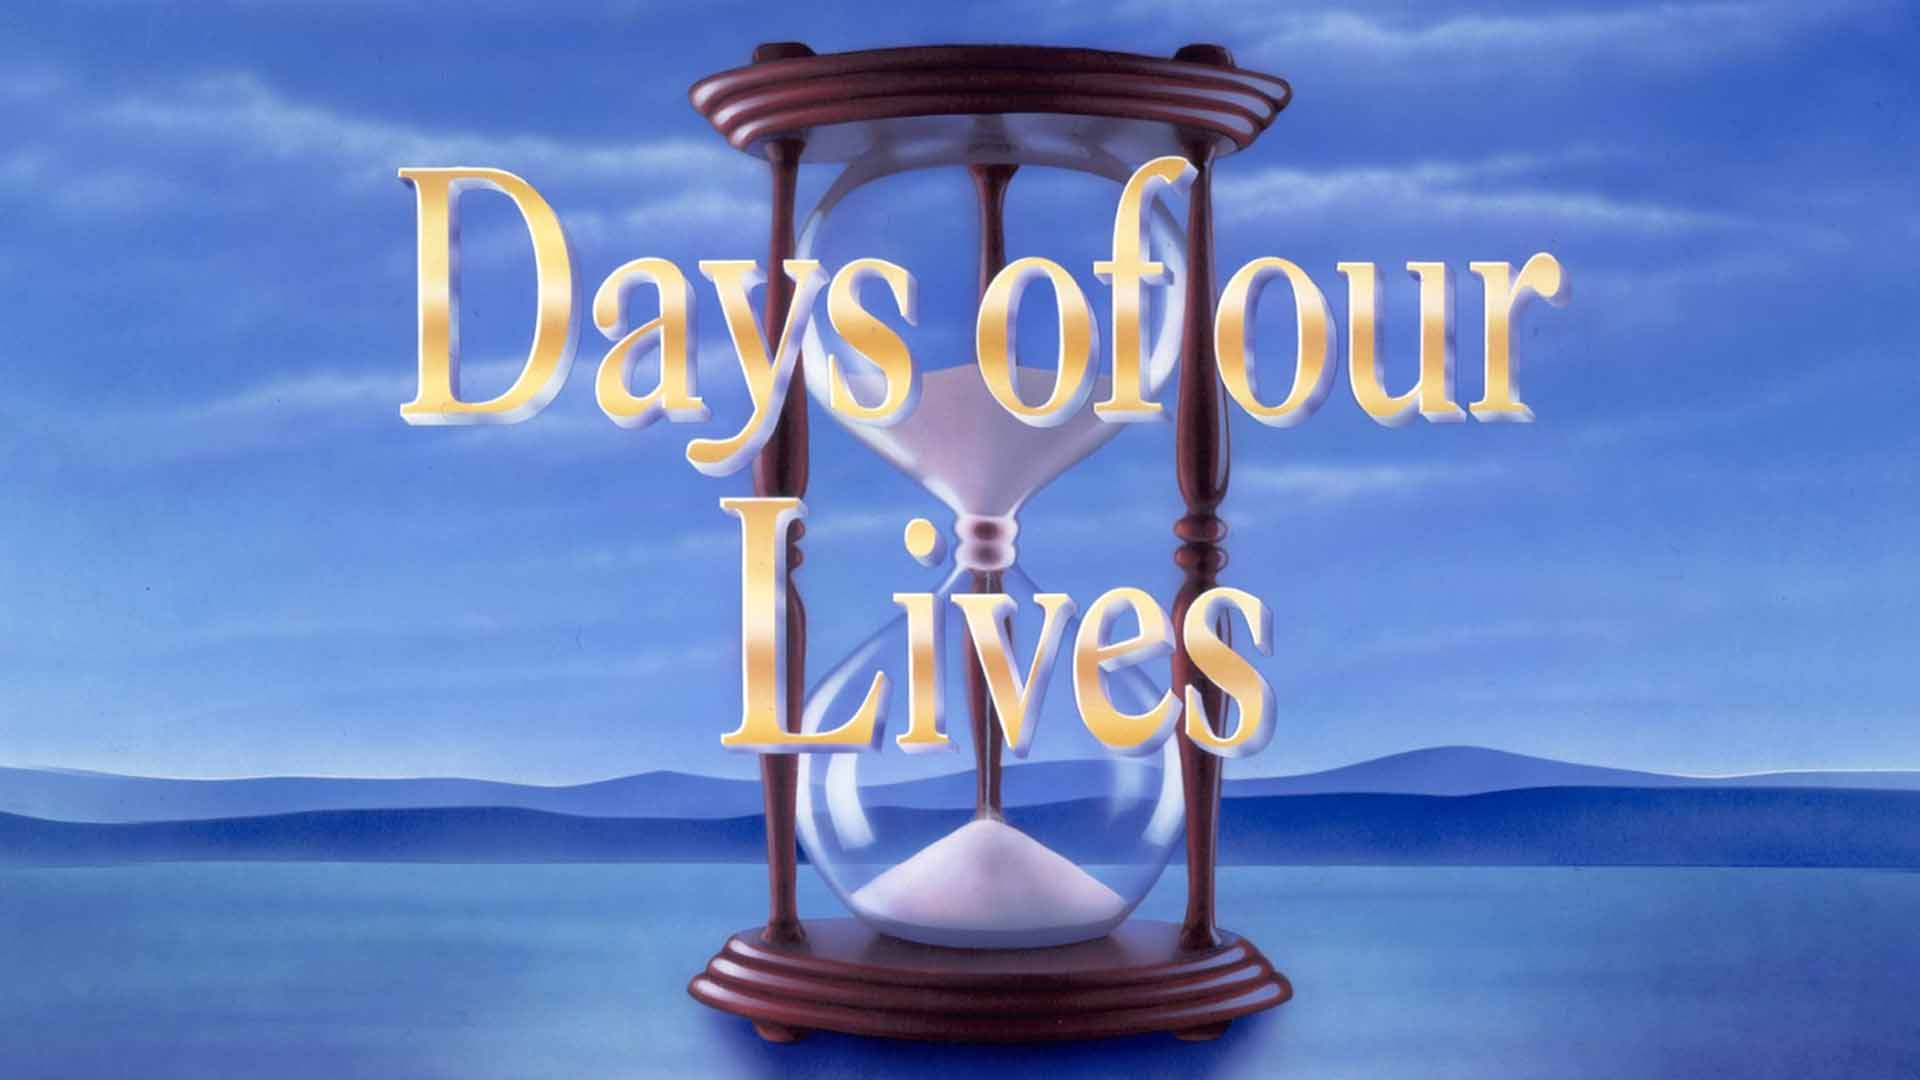 Hourglass image on the main poster of the Days of Our Lives series